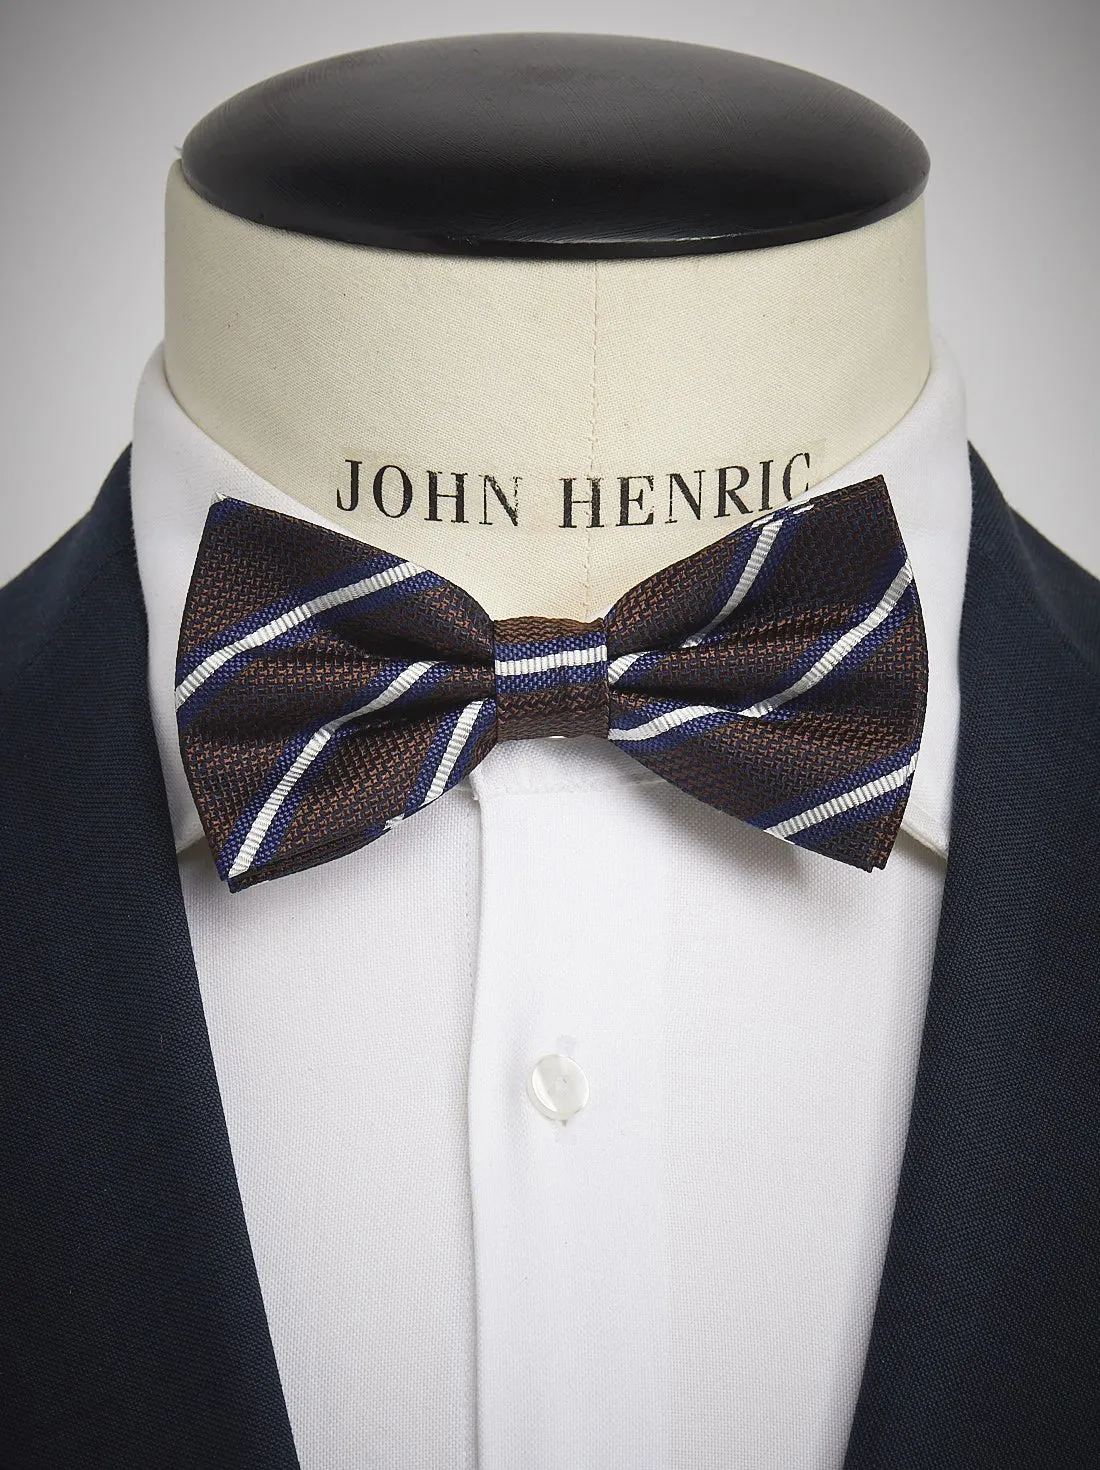 Brown Striped Bow Tie